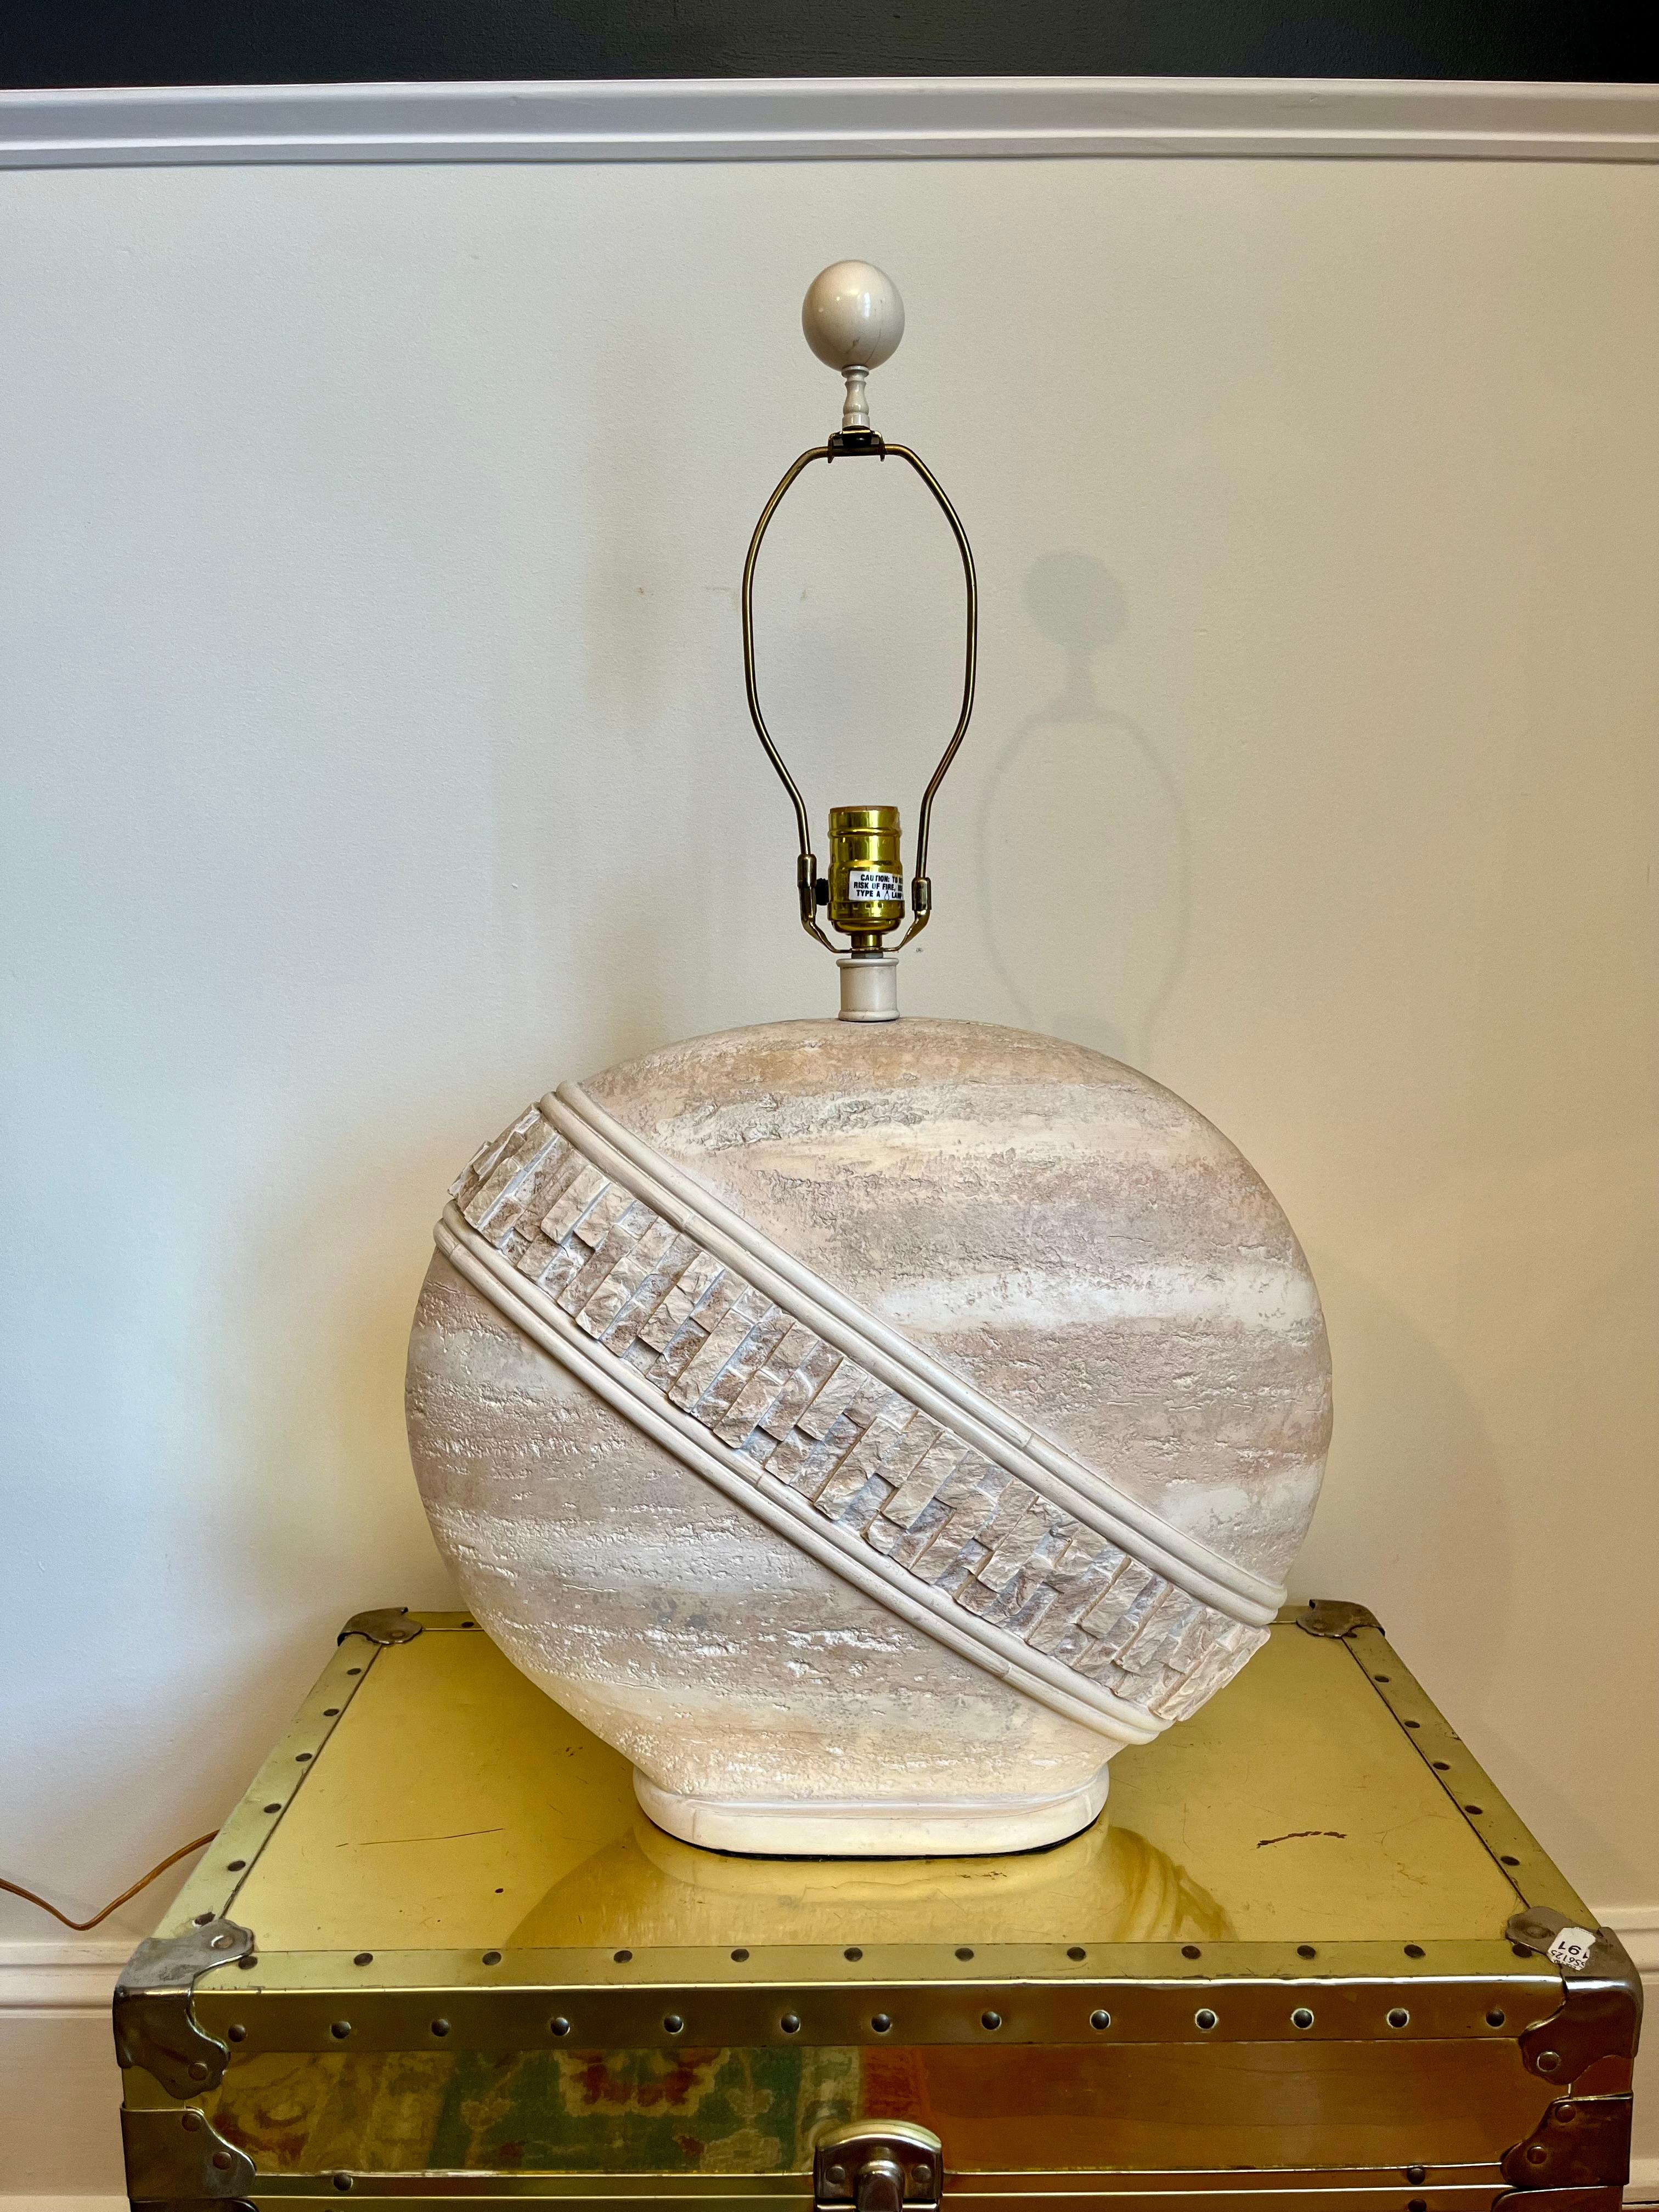 Exceptional vintage postmodern lamp. Features a beige faux tessellated stone with a polished upper section. Nice visual with angular detailing set on oval form. Pacific Coast MFG.